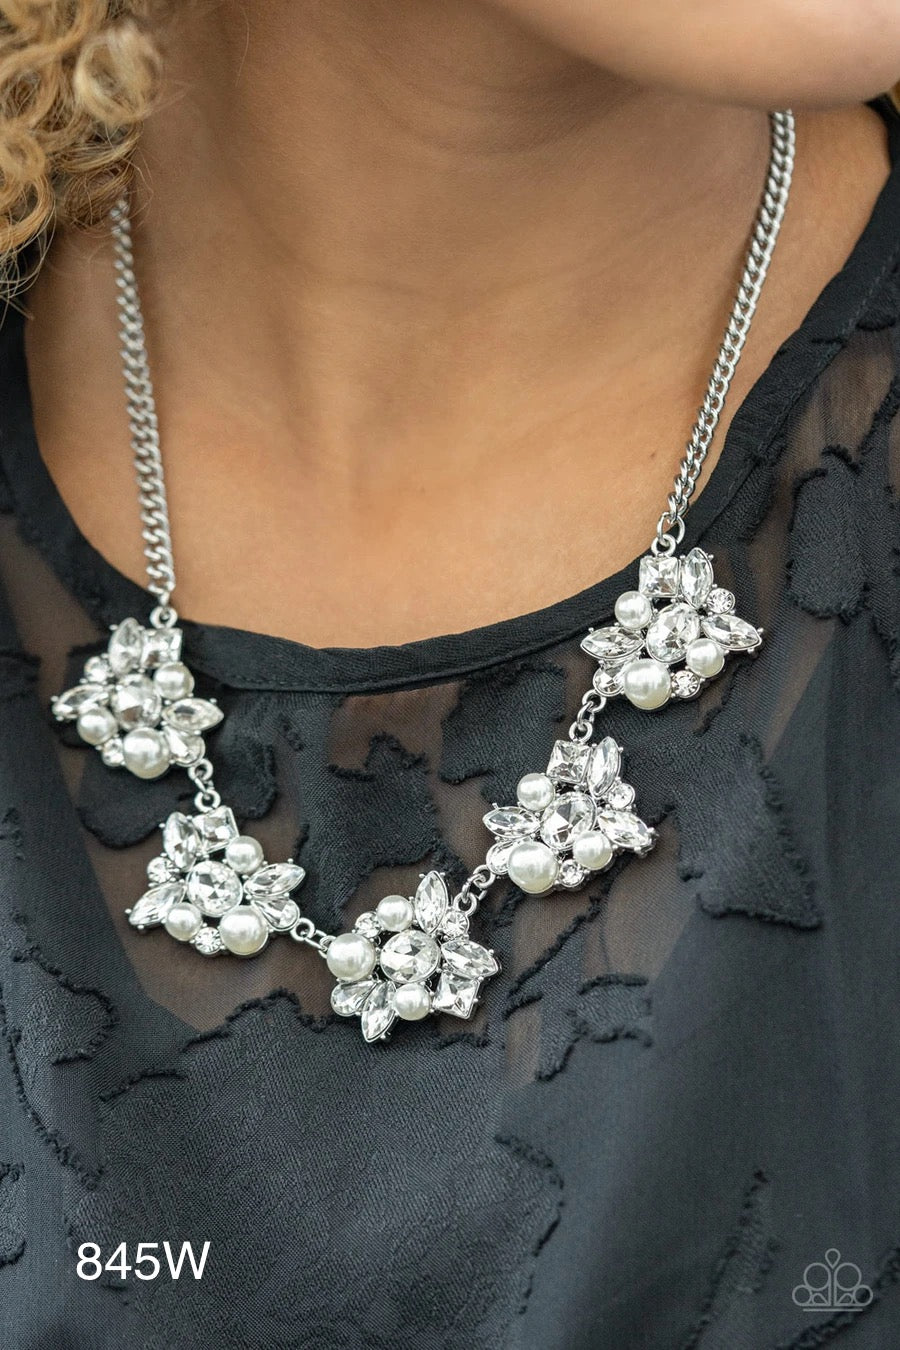 Paparazzi “HEIRESS of Them All” White Necklace Earring Set